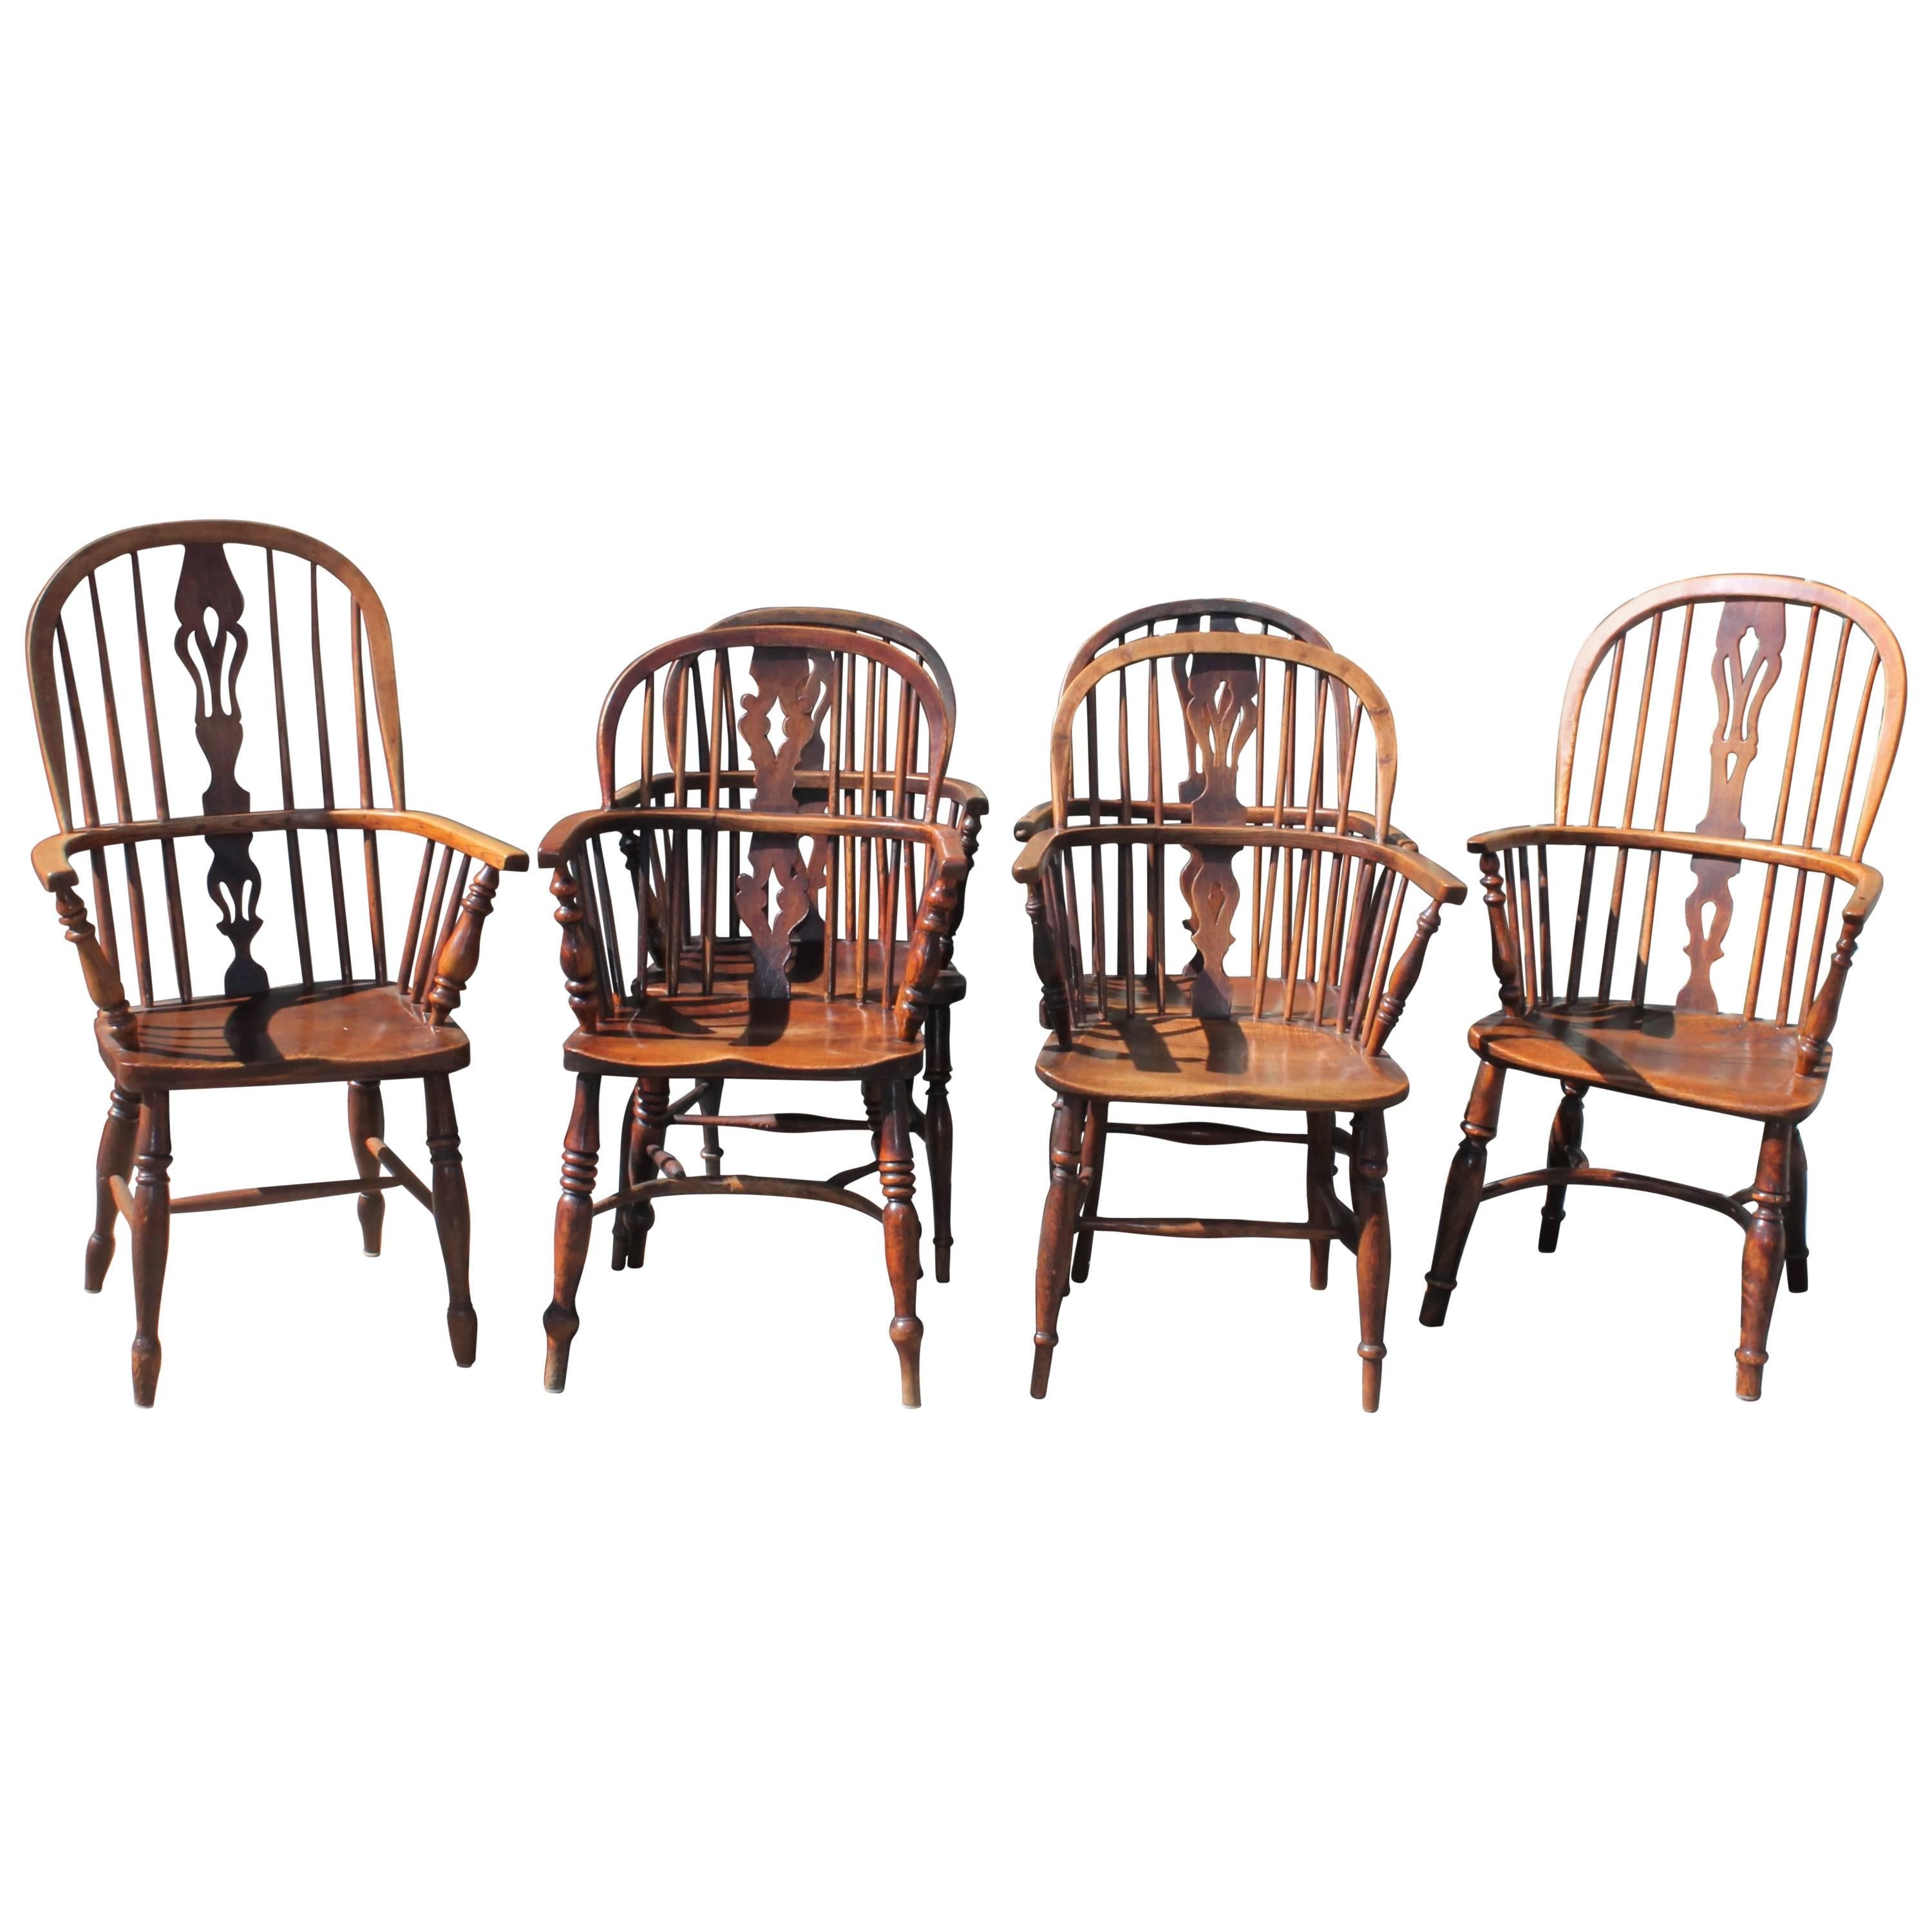 Set of Six Early 19th Century English Windsor Chairs